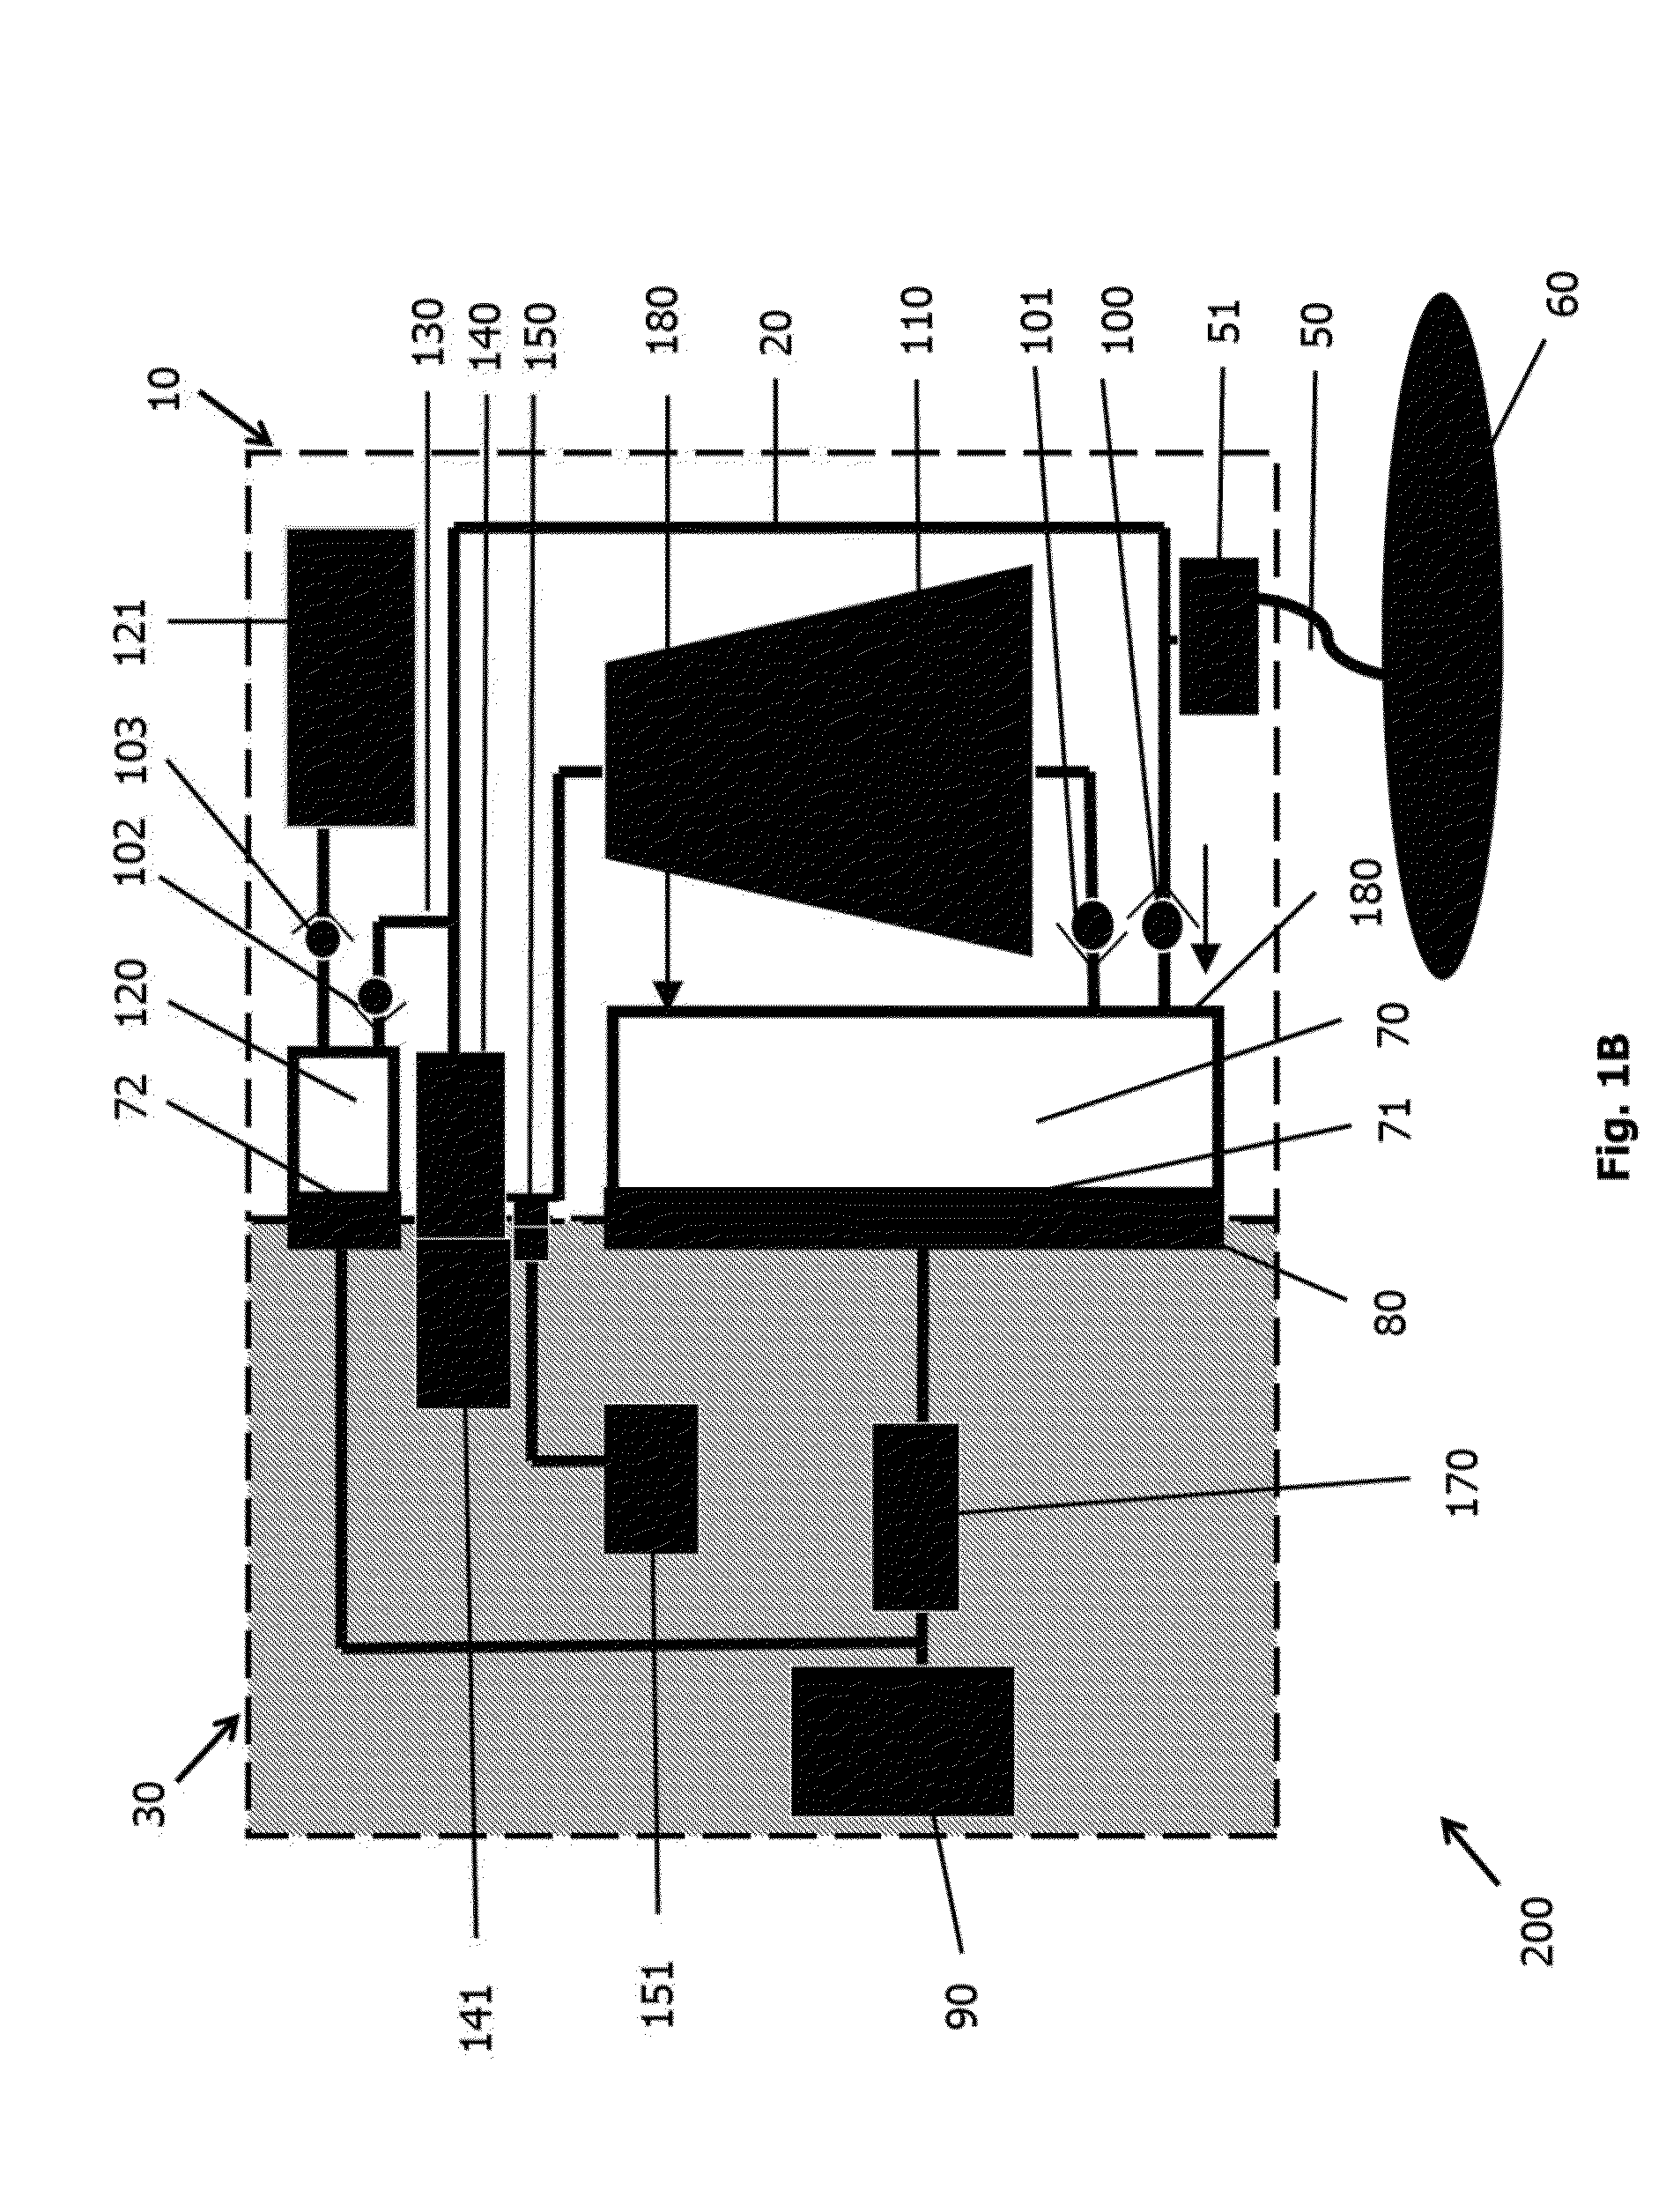 Sensing system for detecting a substance in a dialysate